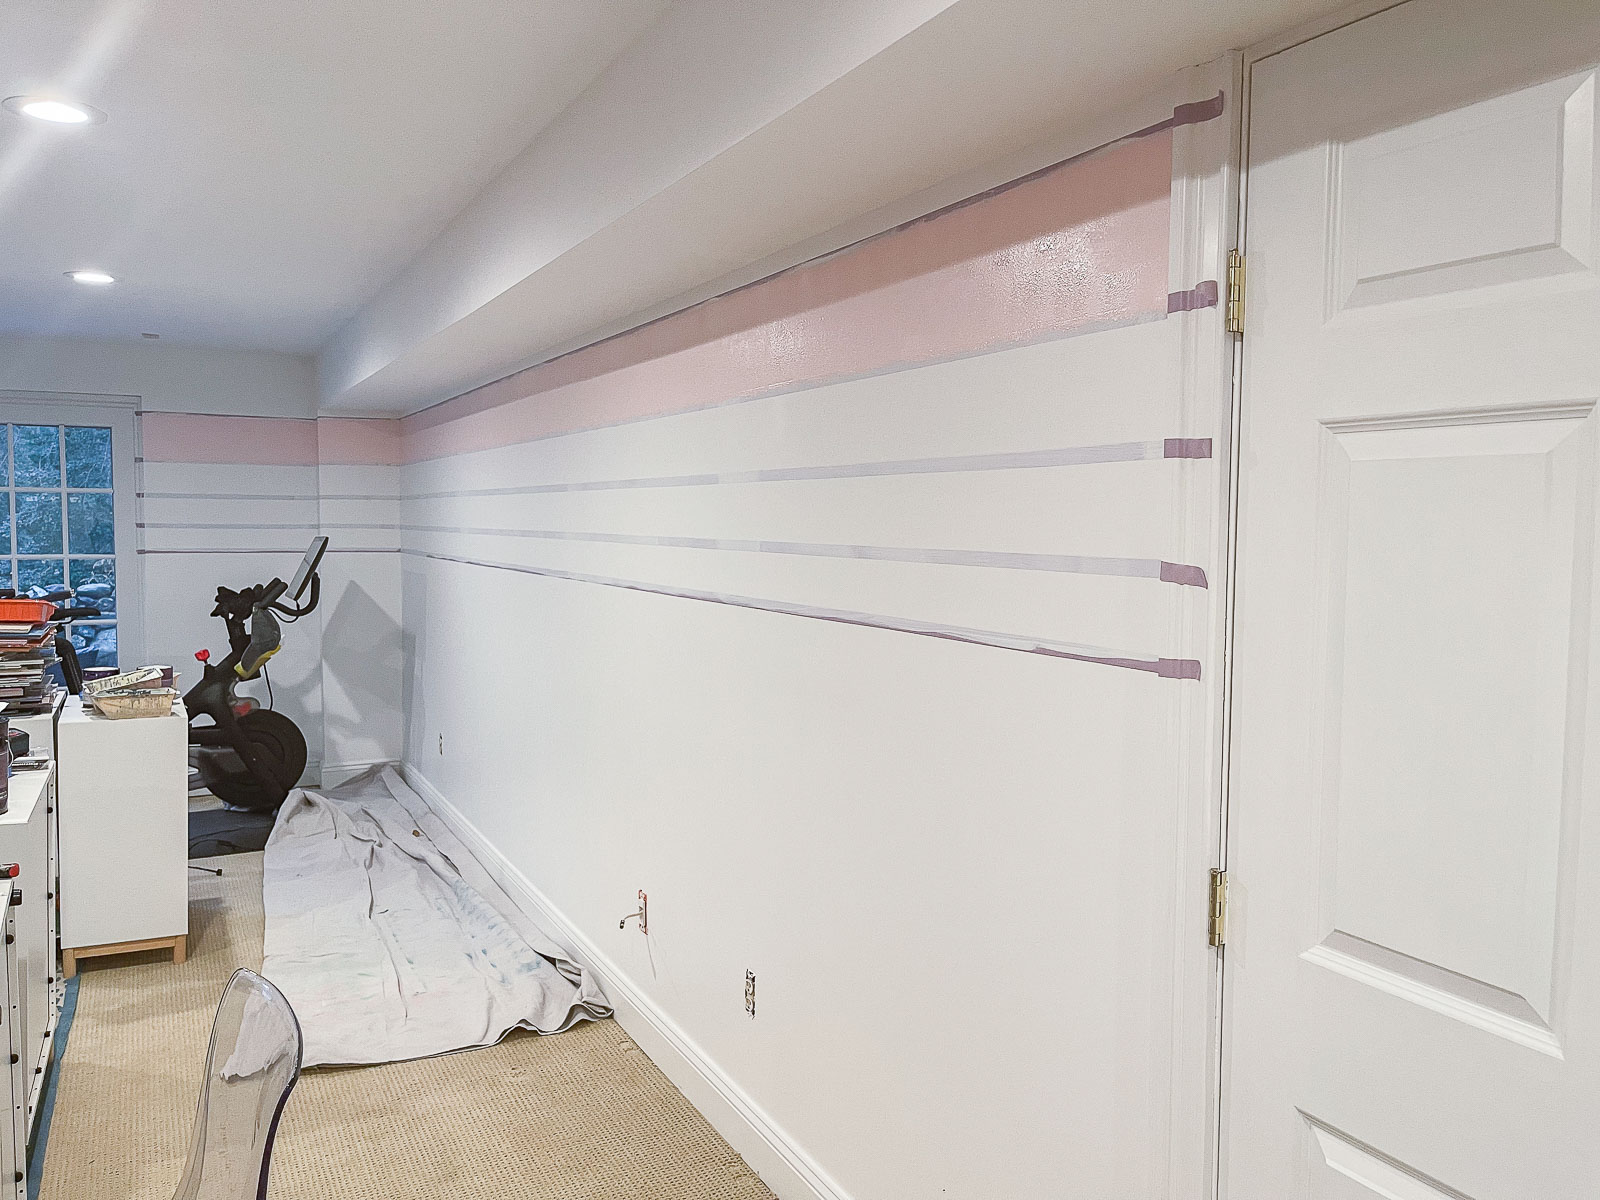 painting stripes on the wall